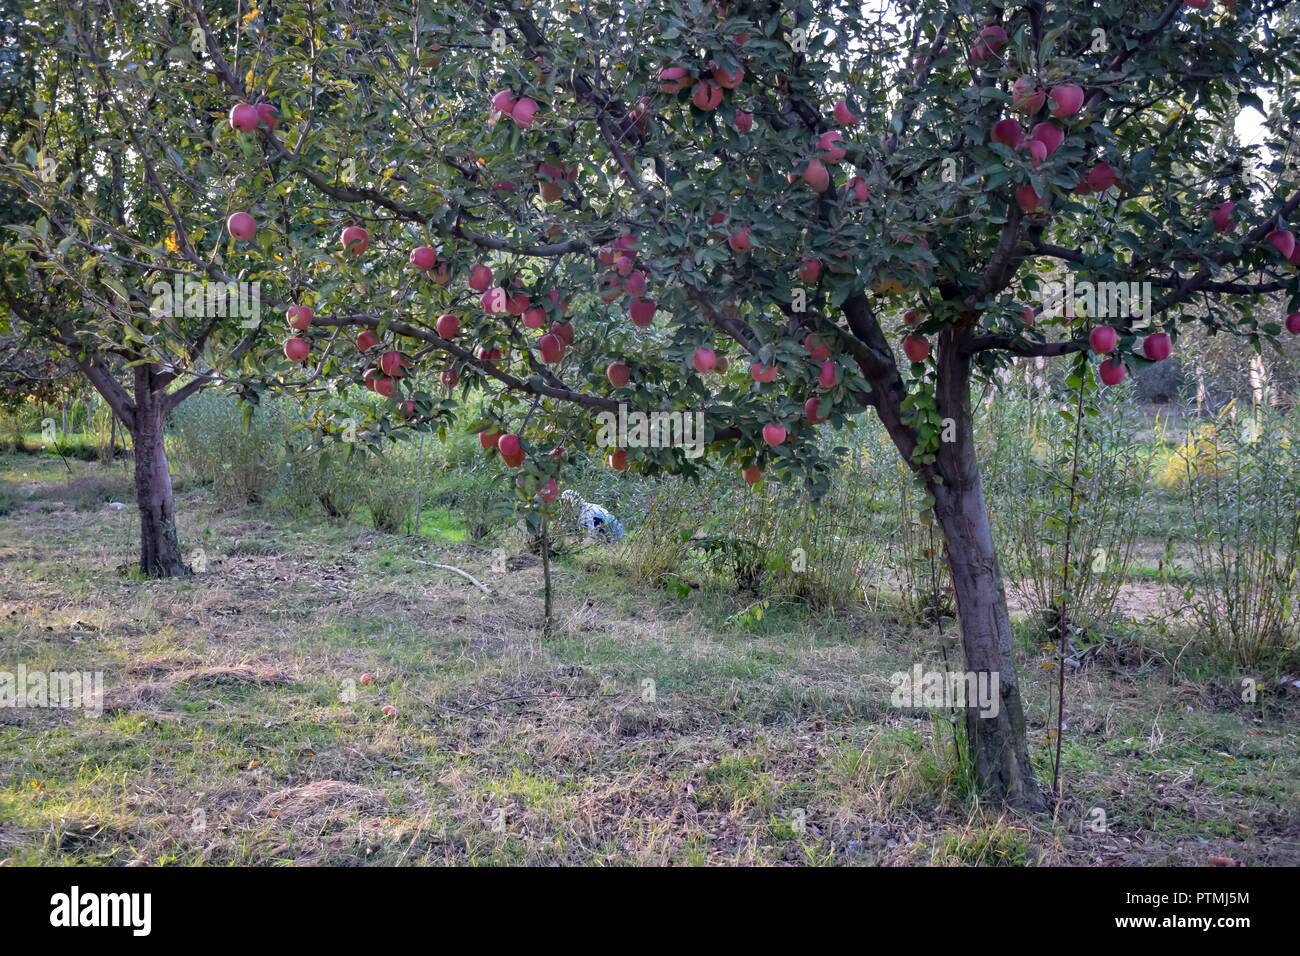 Apples are seen on a tree in an orchard in Pulwama during the apple harvest. Kashmir is the prime source of all apple production in India where there are around 113 varieties of apples. In the autumn season the orchards are packed with the red blooms of apple trees. Stock Photo